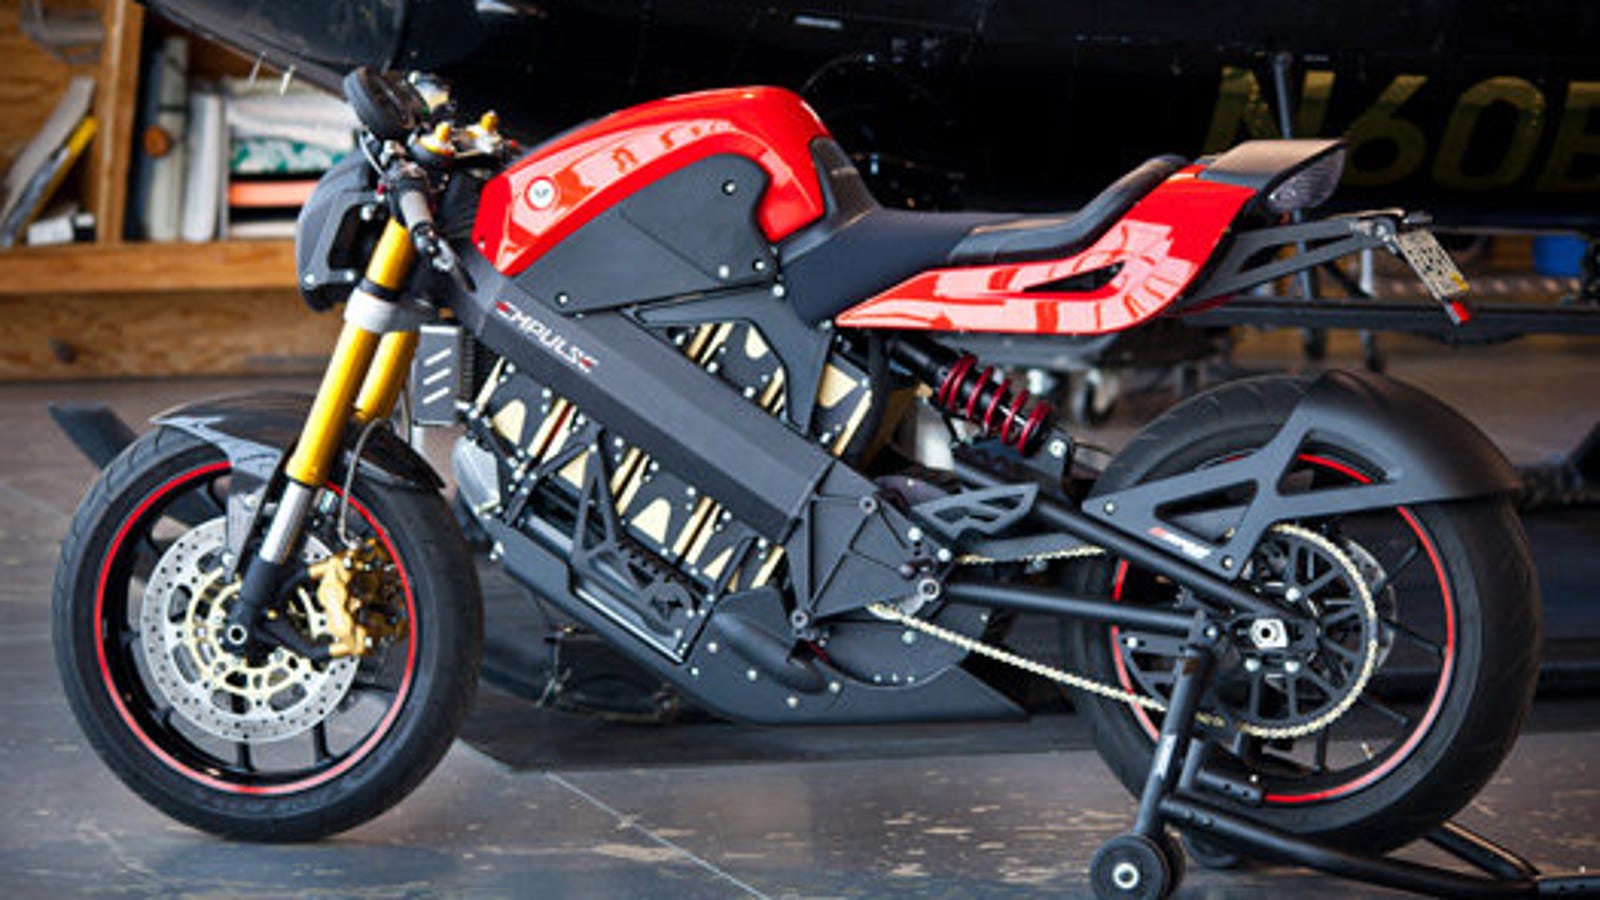 This Electric Motorcycle Can Reach a 100 Miles Per Hour